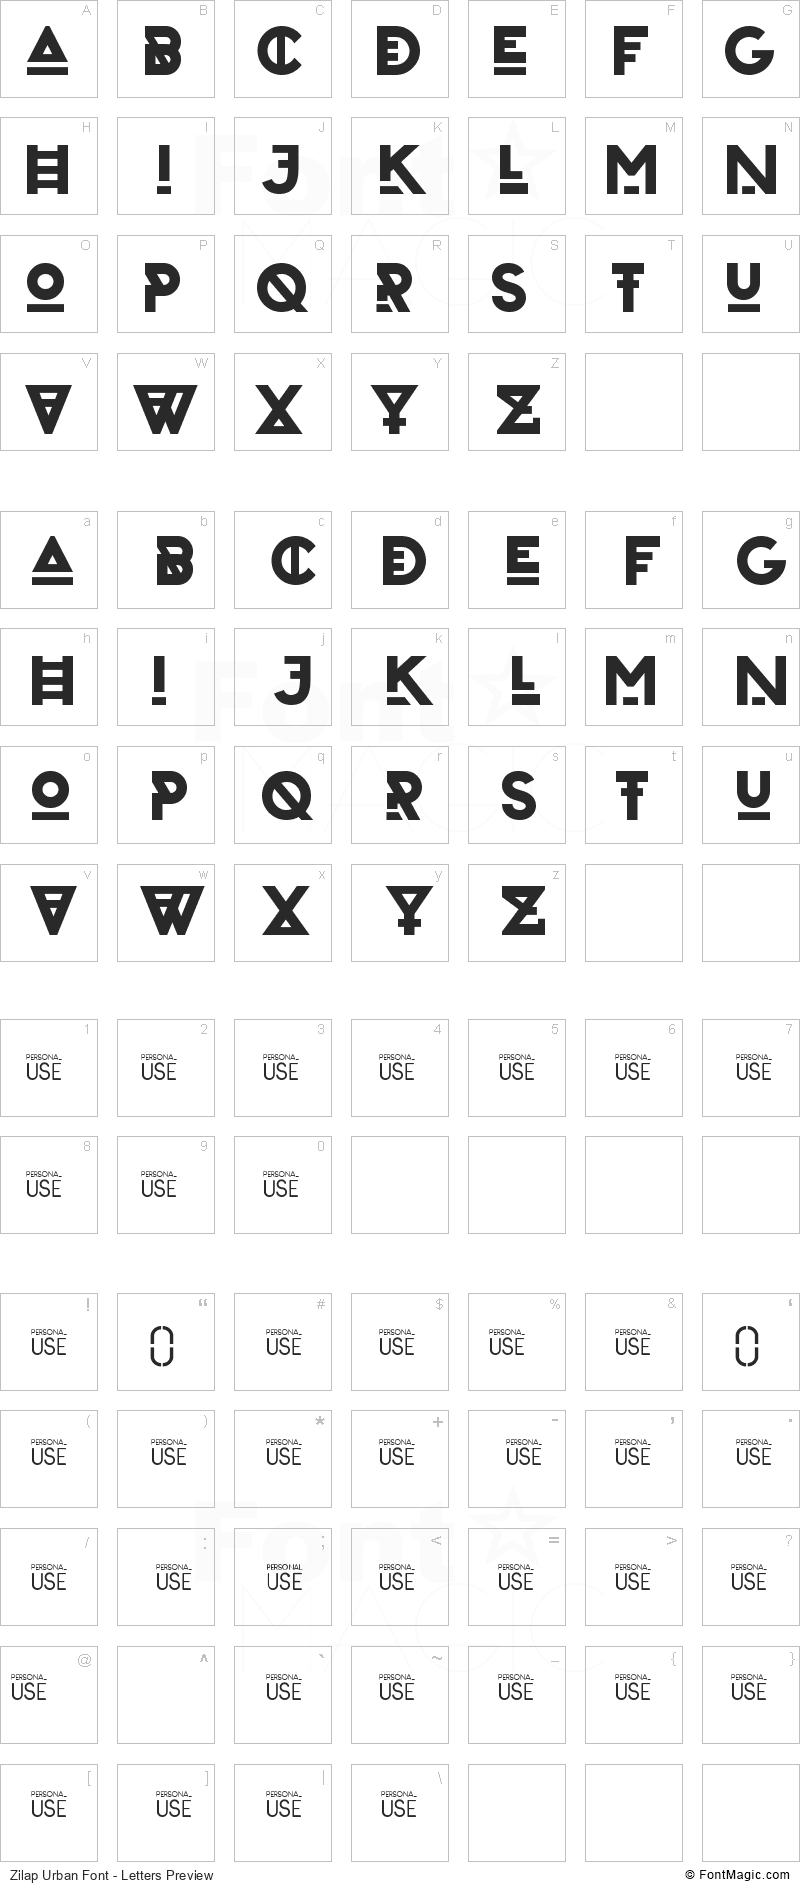 Zilap Urban Font - All Latters Preview Chart